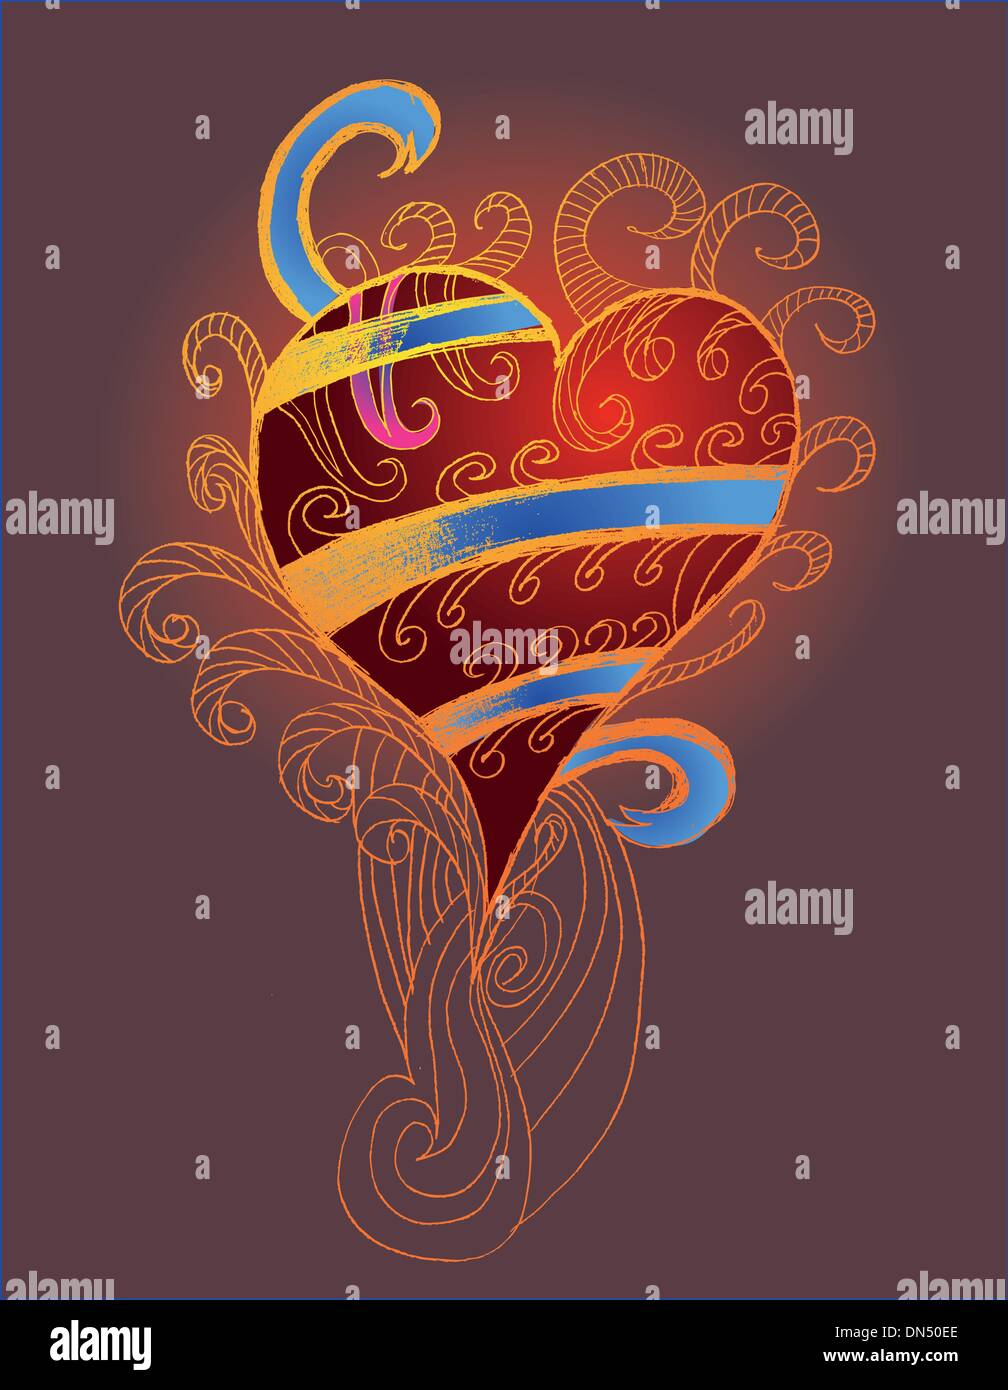 The heart is in blossom / Surreal romantic sketch Stock Vector